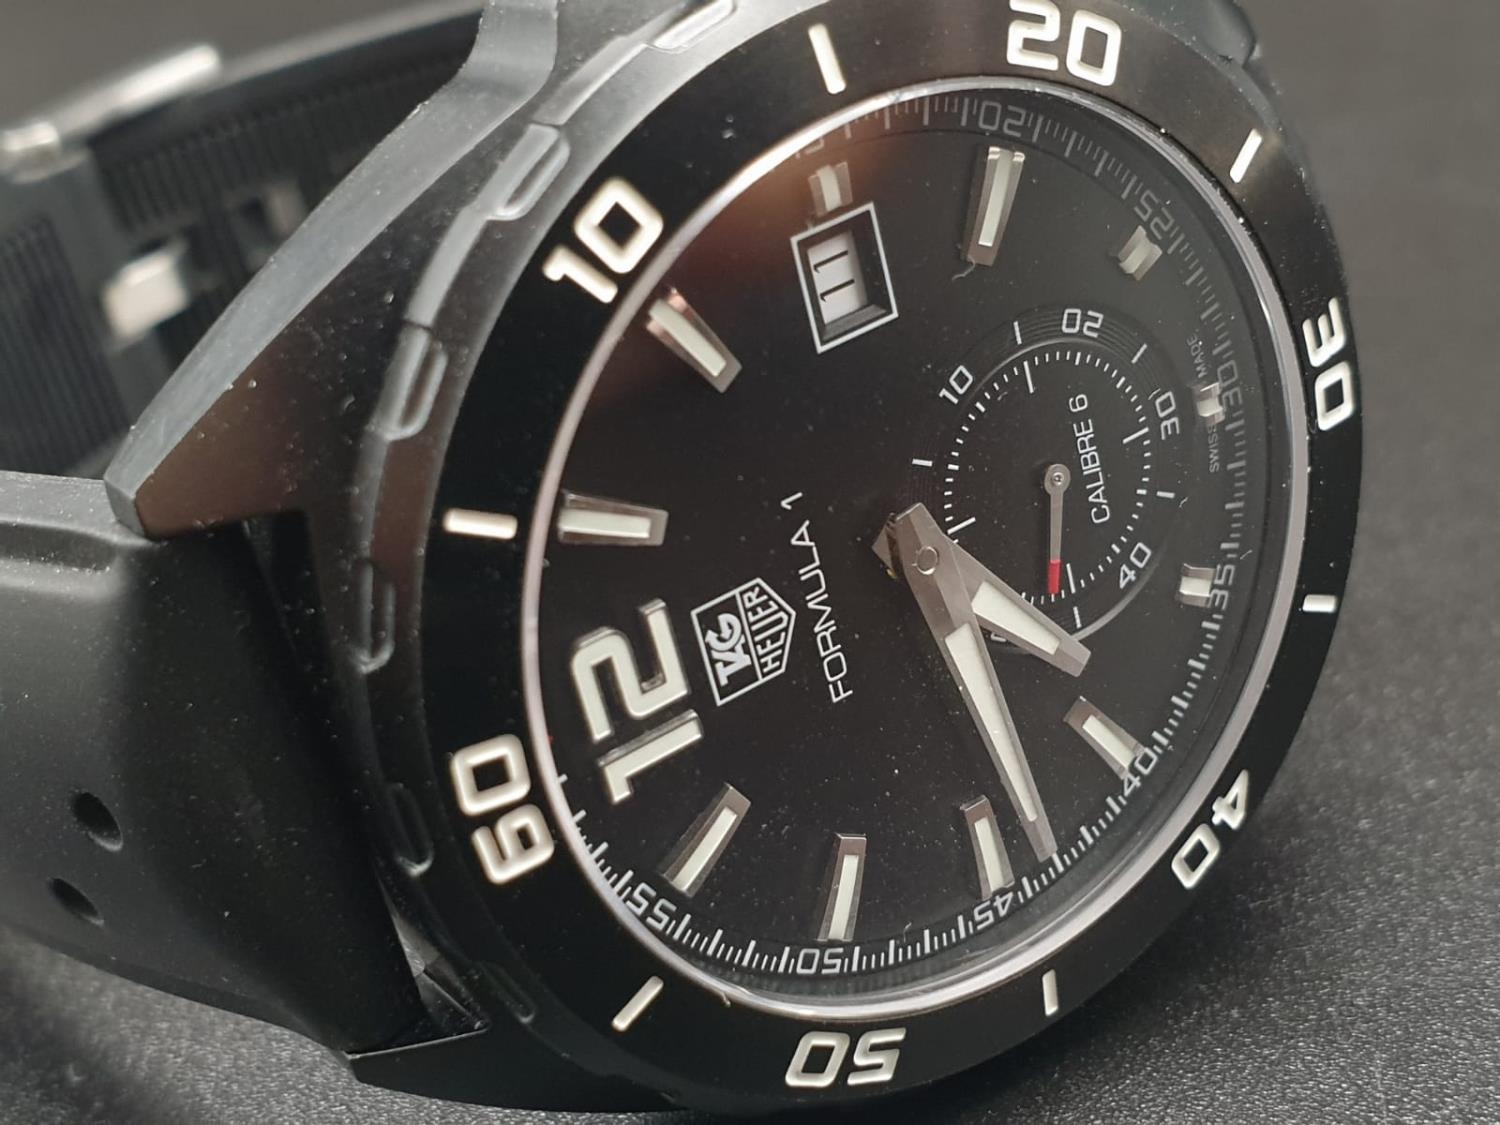 Tag Heuer Formula 1 watch black face and strap, 42mm - Image 5 of 10